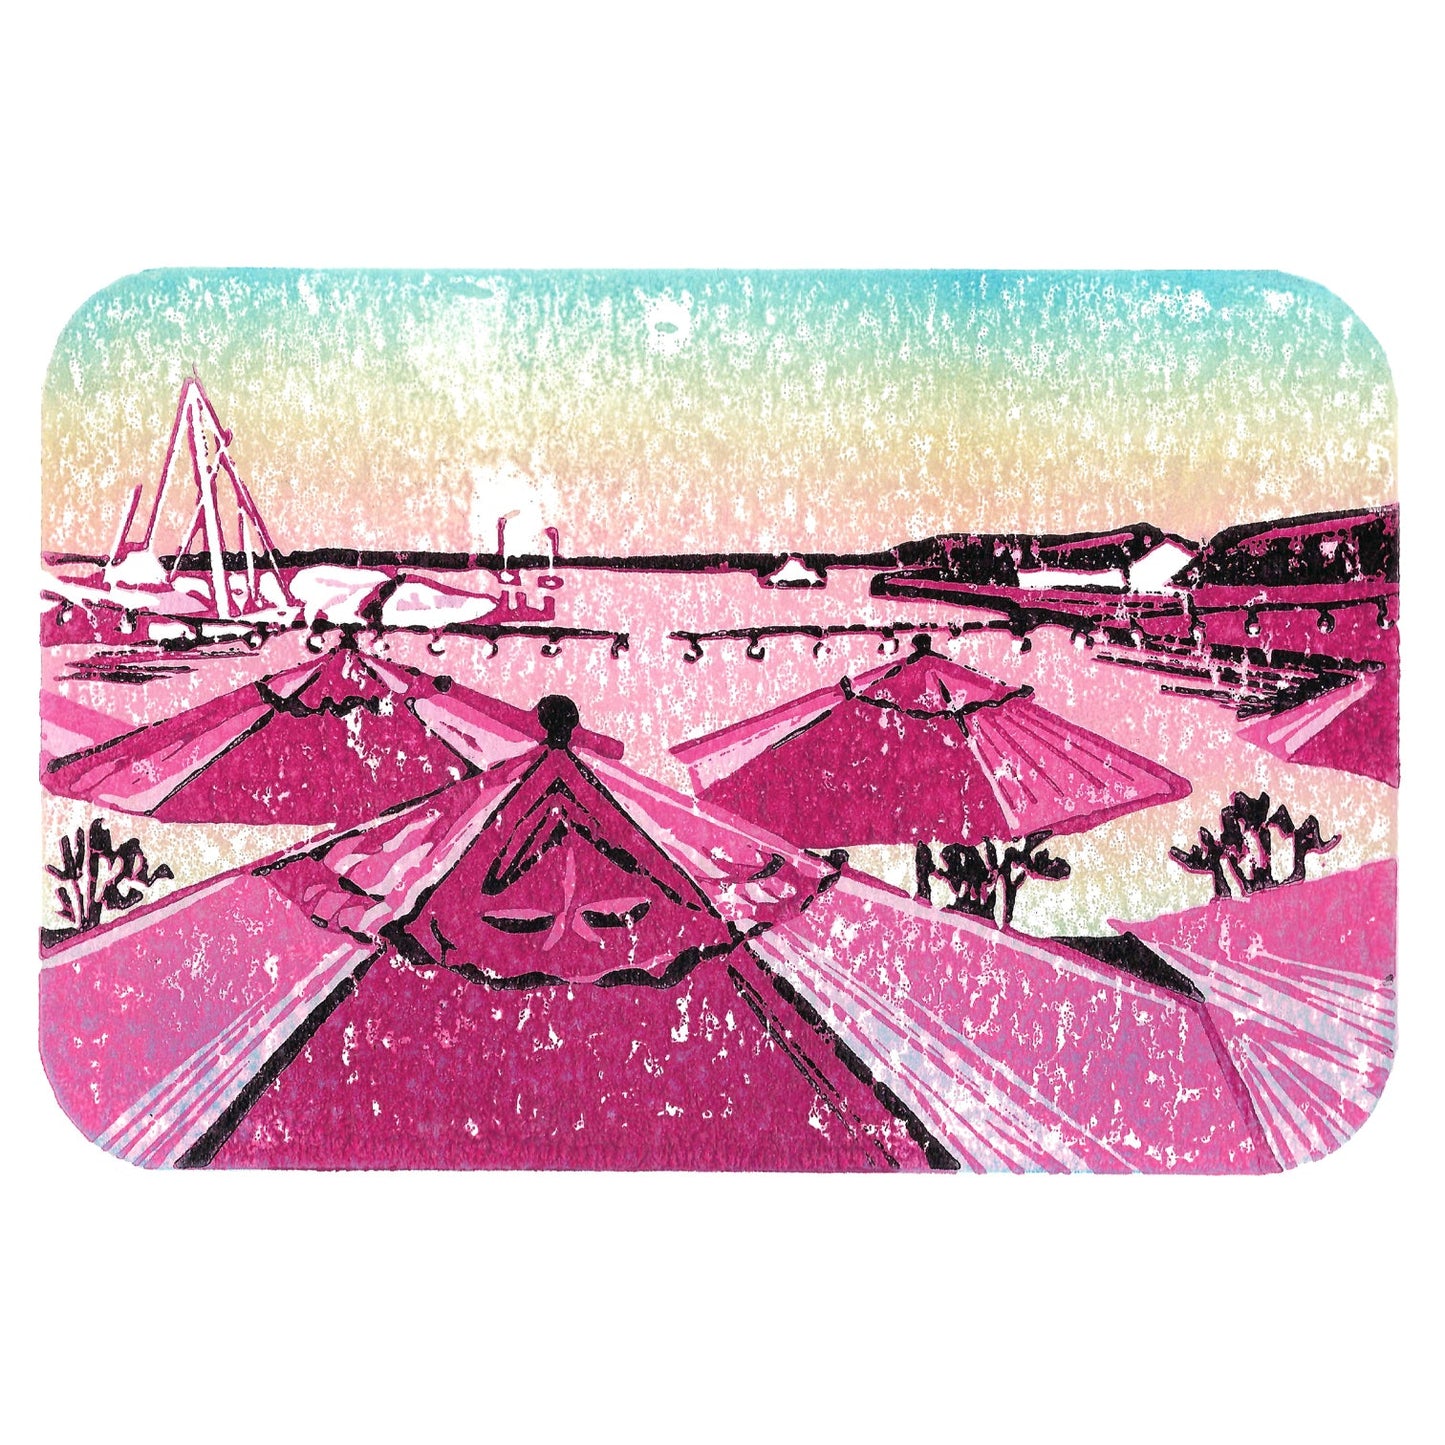 Sunset at the Pony block print created by Natalia Wohletz of Peninsula Prints. Mackinac Island's iconic Pink Pony restaurant and bar is a favorite of sailors, tourists and locals.   The patio serves up great views of ferry boats, sailboats and yachts in the harbor.  